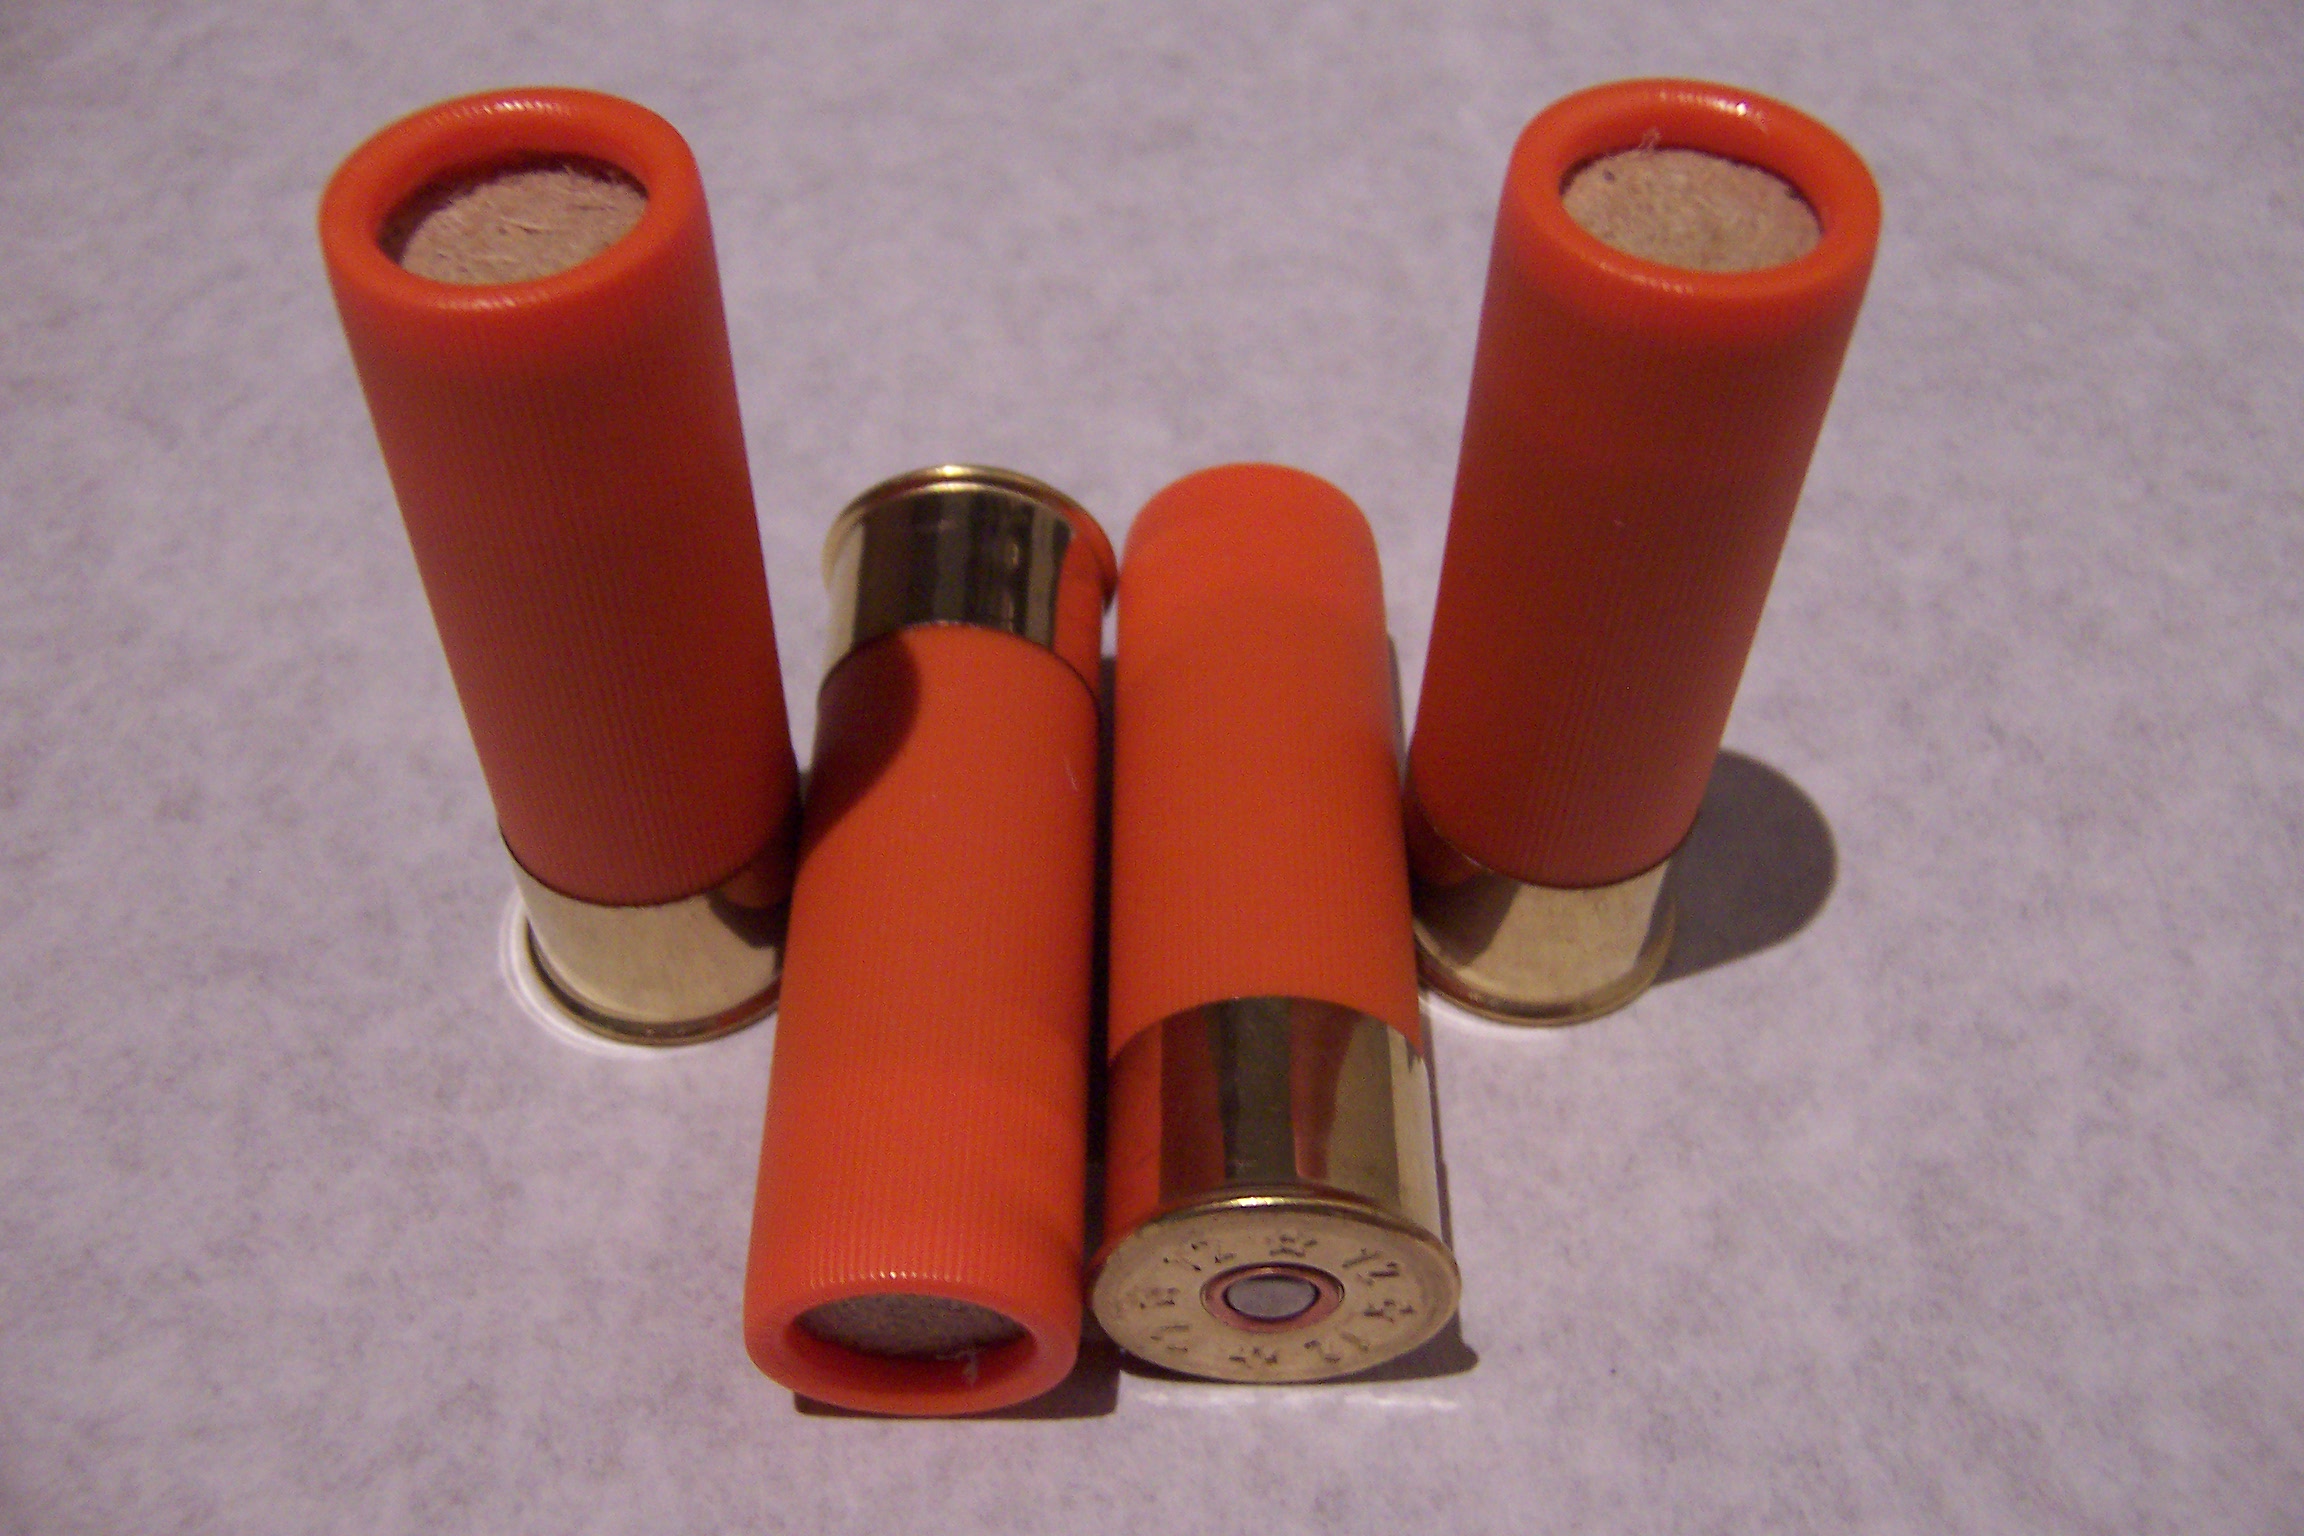  St Action Pro 12GA Gauge Shotgun Safety Trainer Cartridge  Dummy Shell Rounds with Brass Case, Orange, 10 Pack : Sports & Outdoors